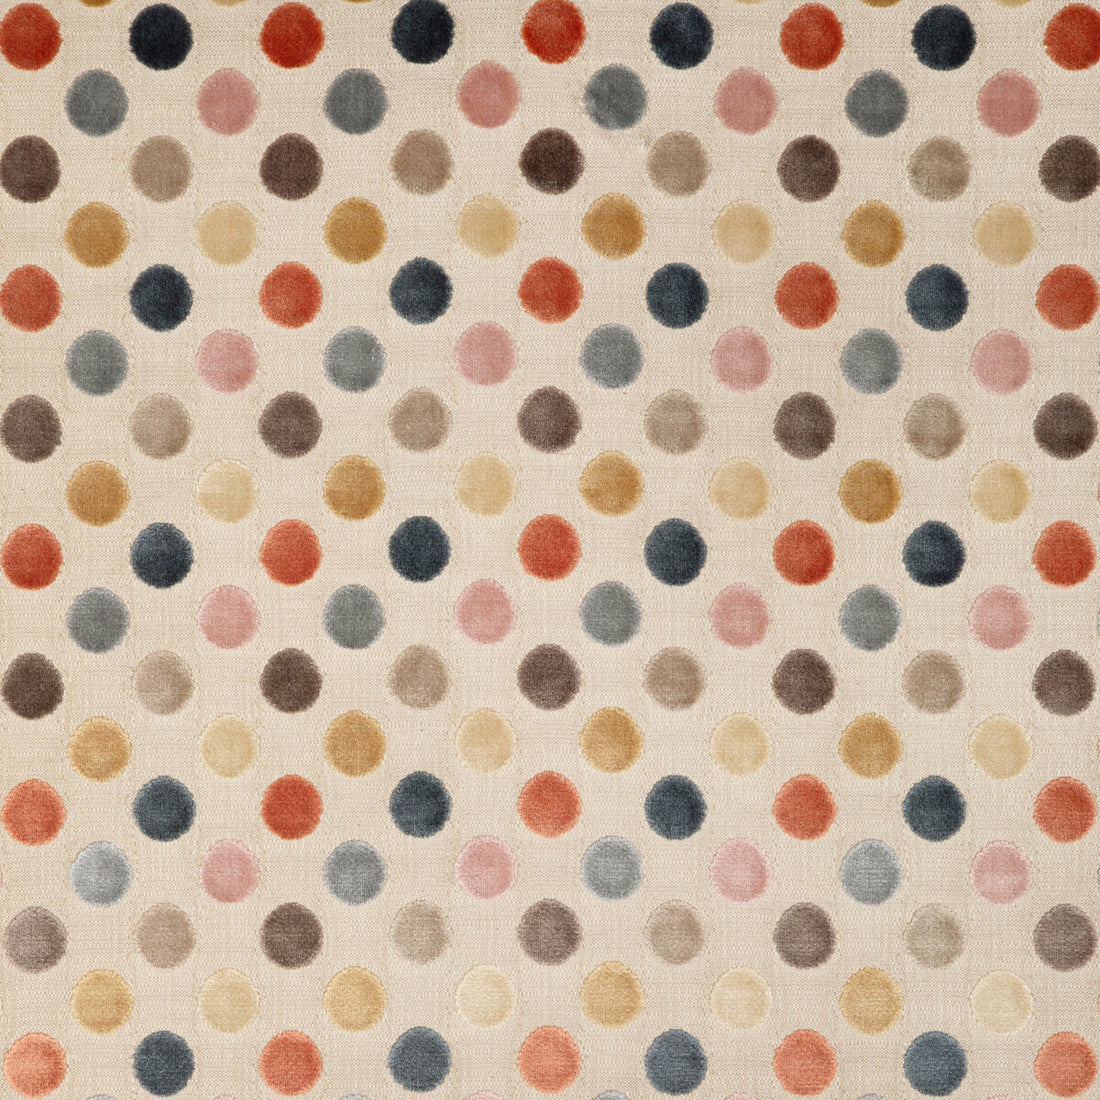 Dot Spot fabric in mirage color - pattern 36888.1612.0 - by Kravet Design in the Mid-Century Modern collection